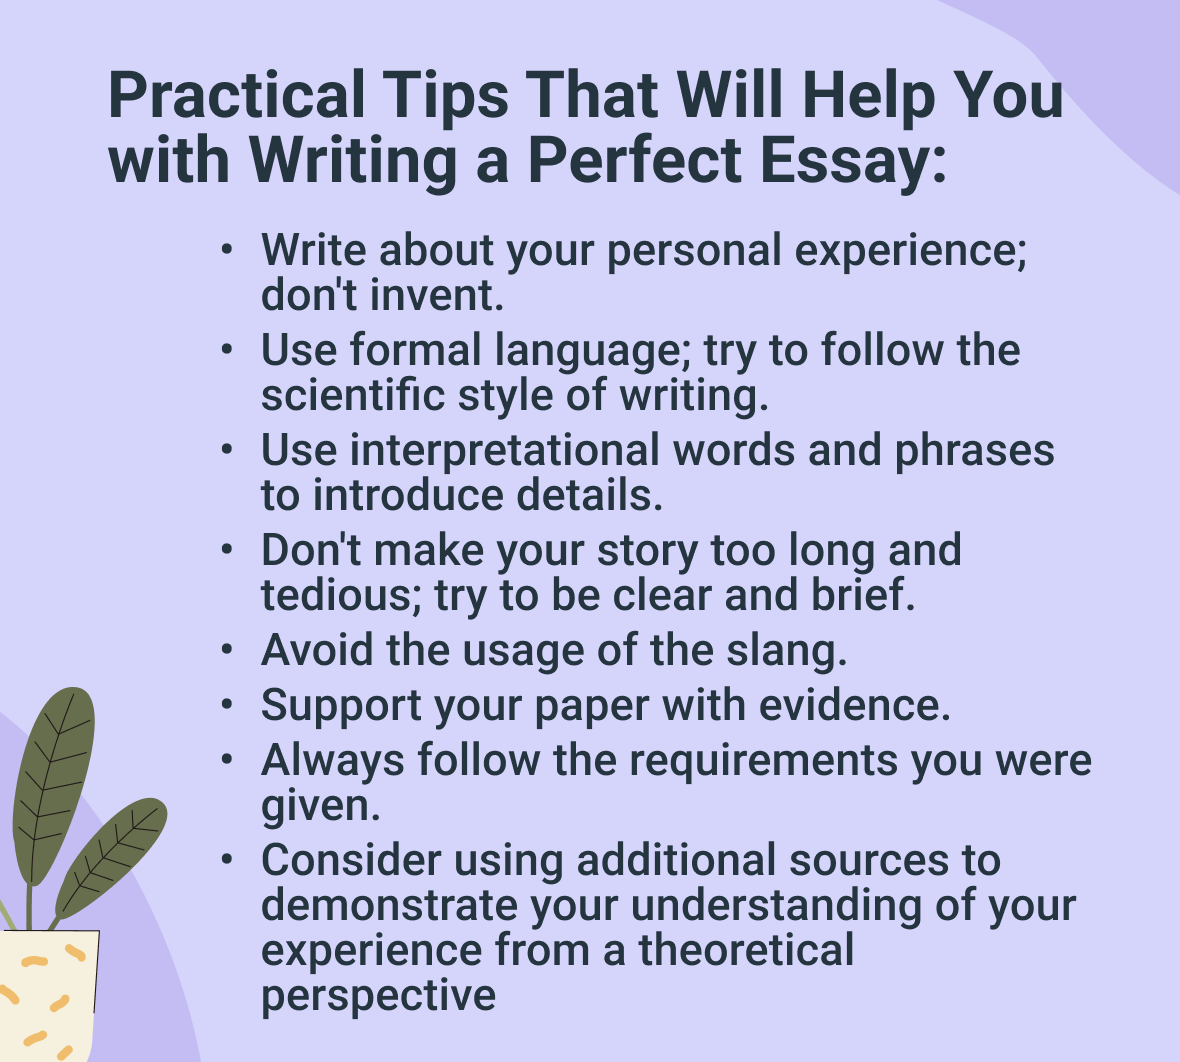 Phrases To Start An Essay